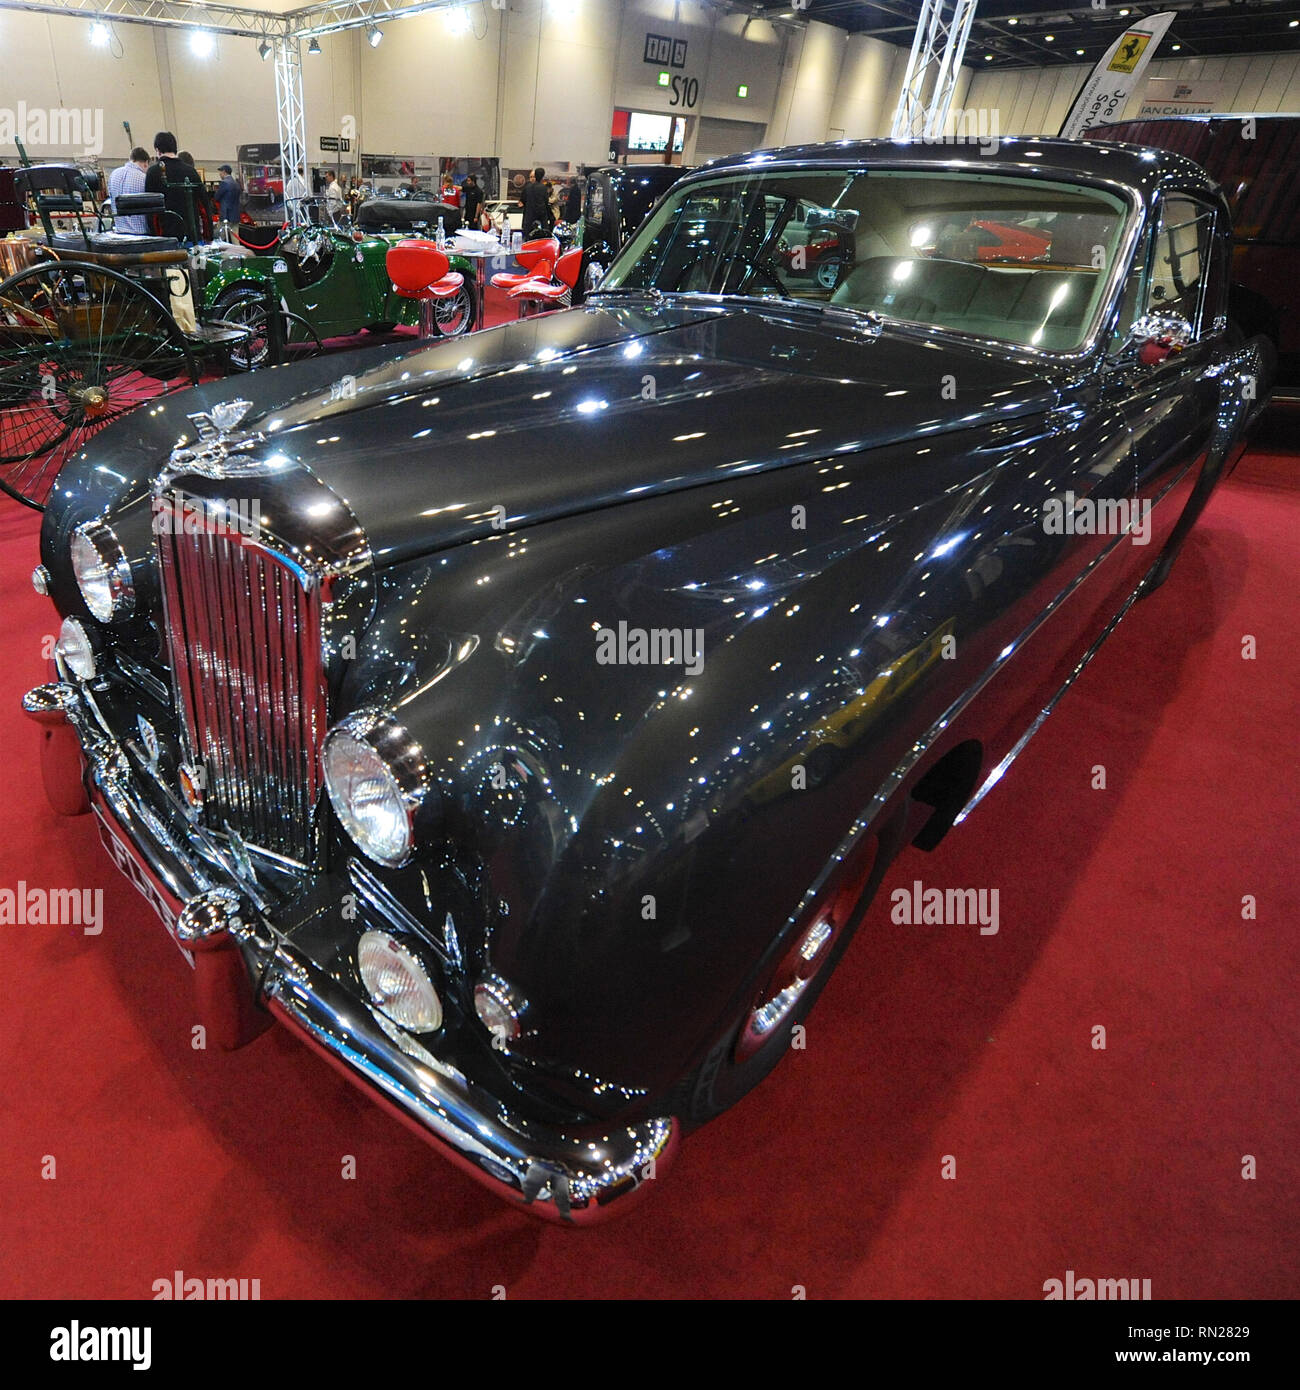 London, UK. 16th Feb 2019. A 1956 Bentley S1 Continental Fastback on display at the London Classic Car Show which is taking place at ExCel London, United Kingdom.   Credit: Michael Preston/Alamy Live News Stock Photo